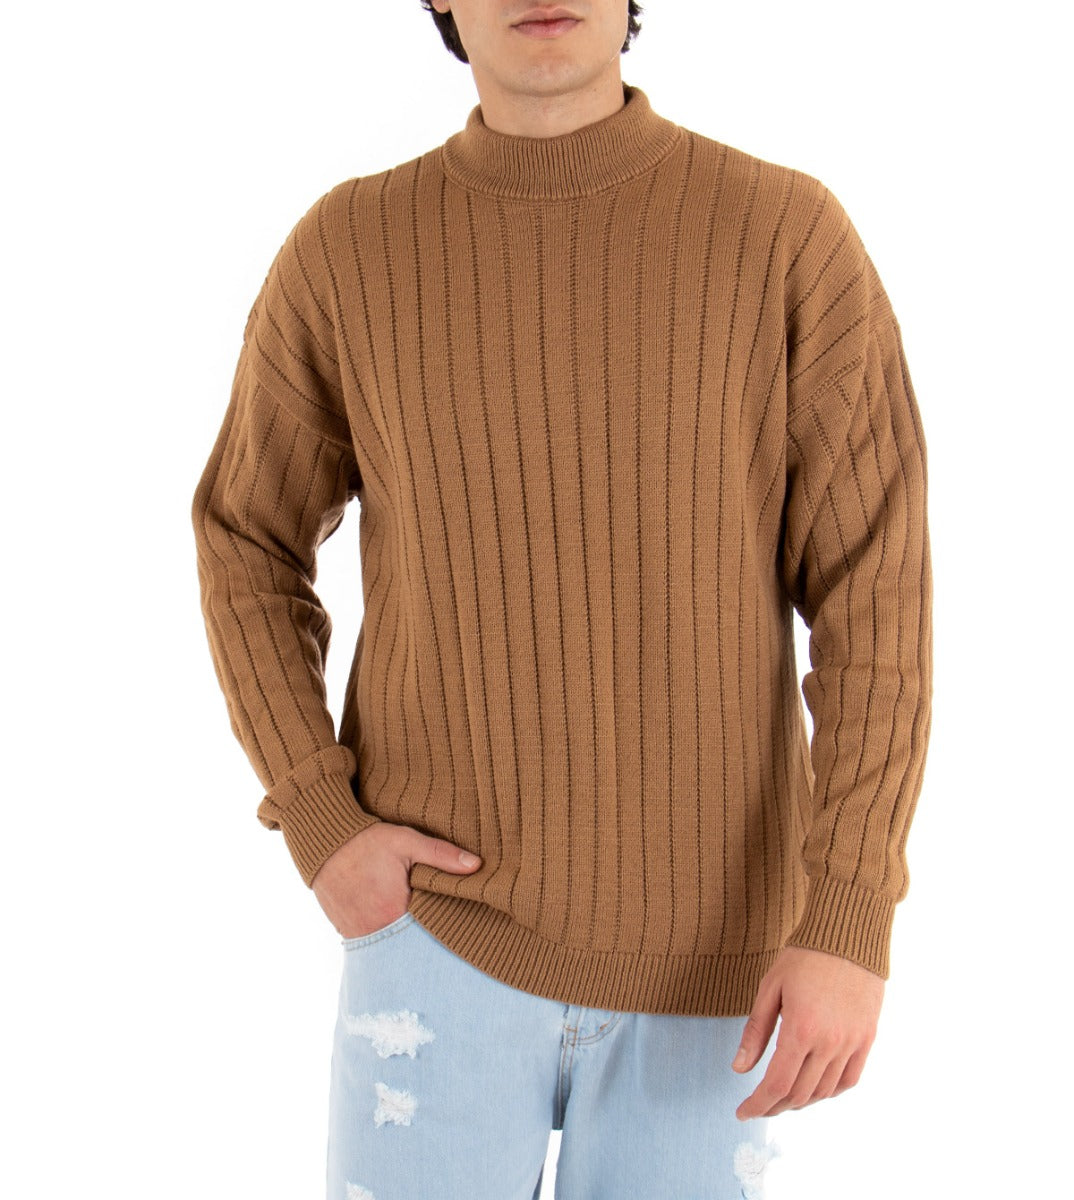 Men's Half-Neck Sweater Solid Color Camel Ribbed Striped Weave GIOSAL-M2170A